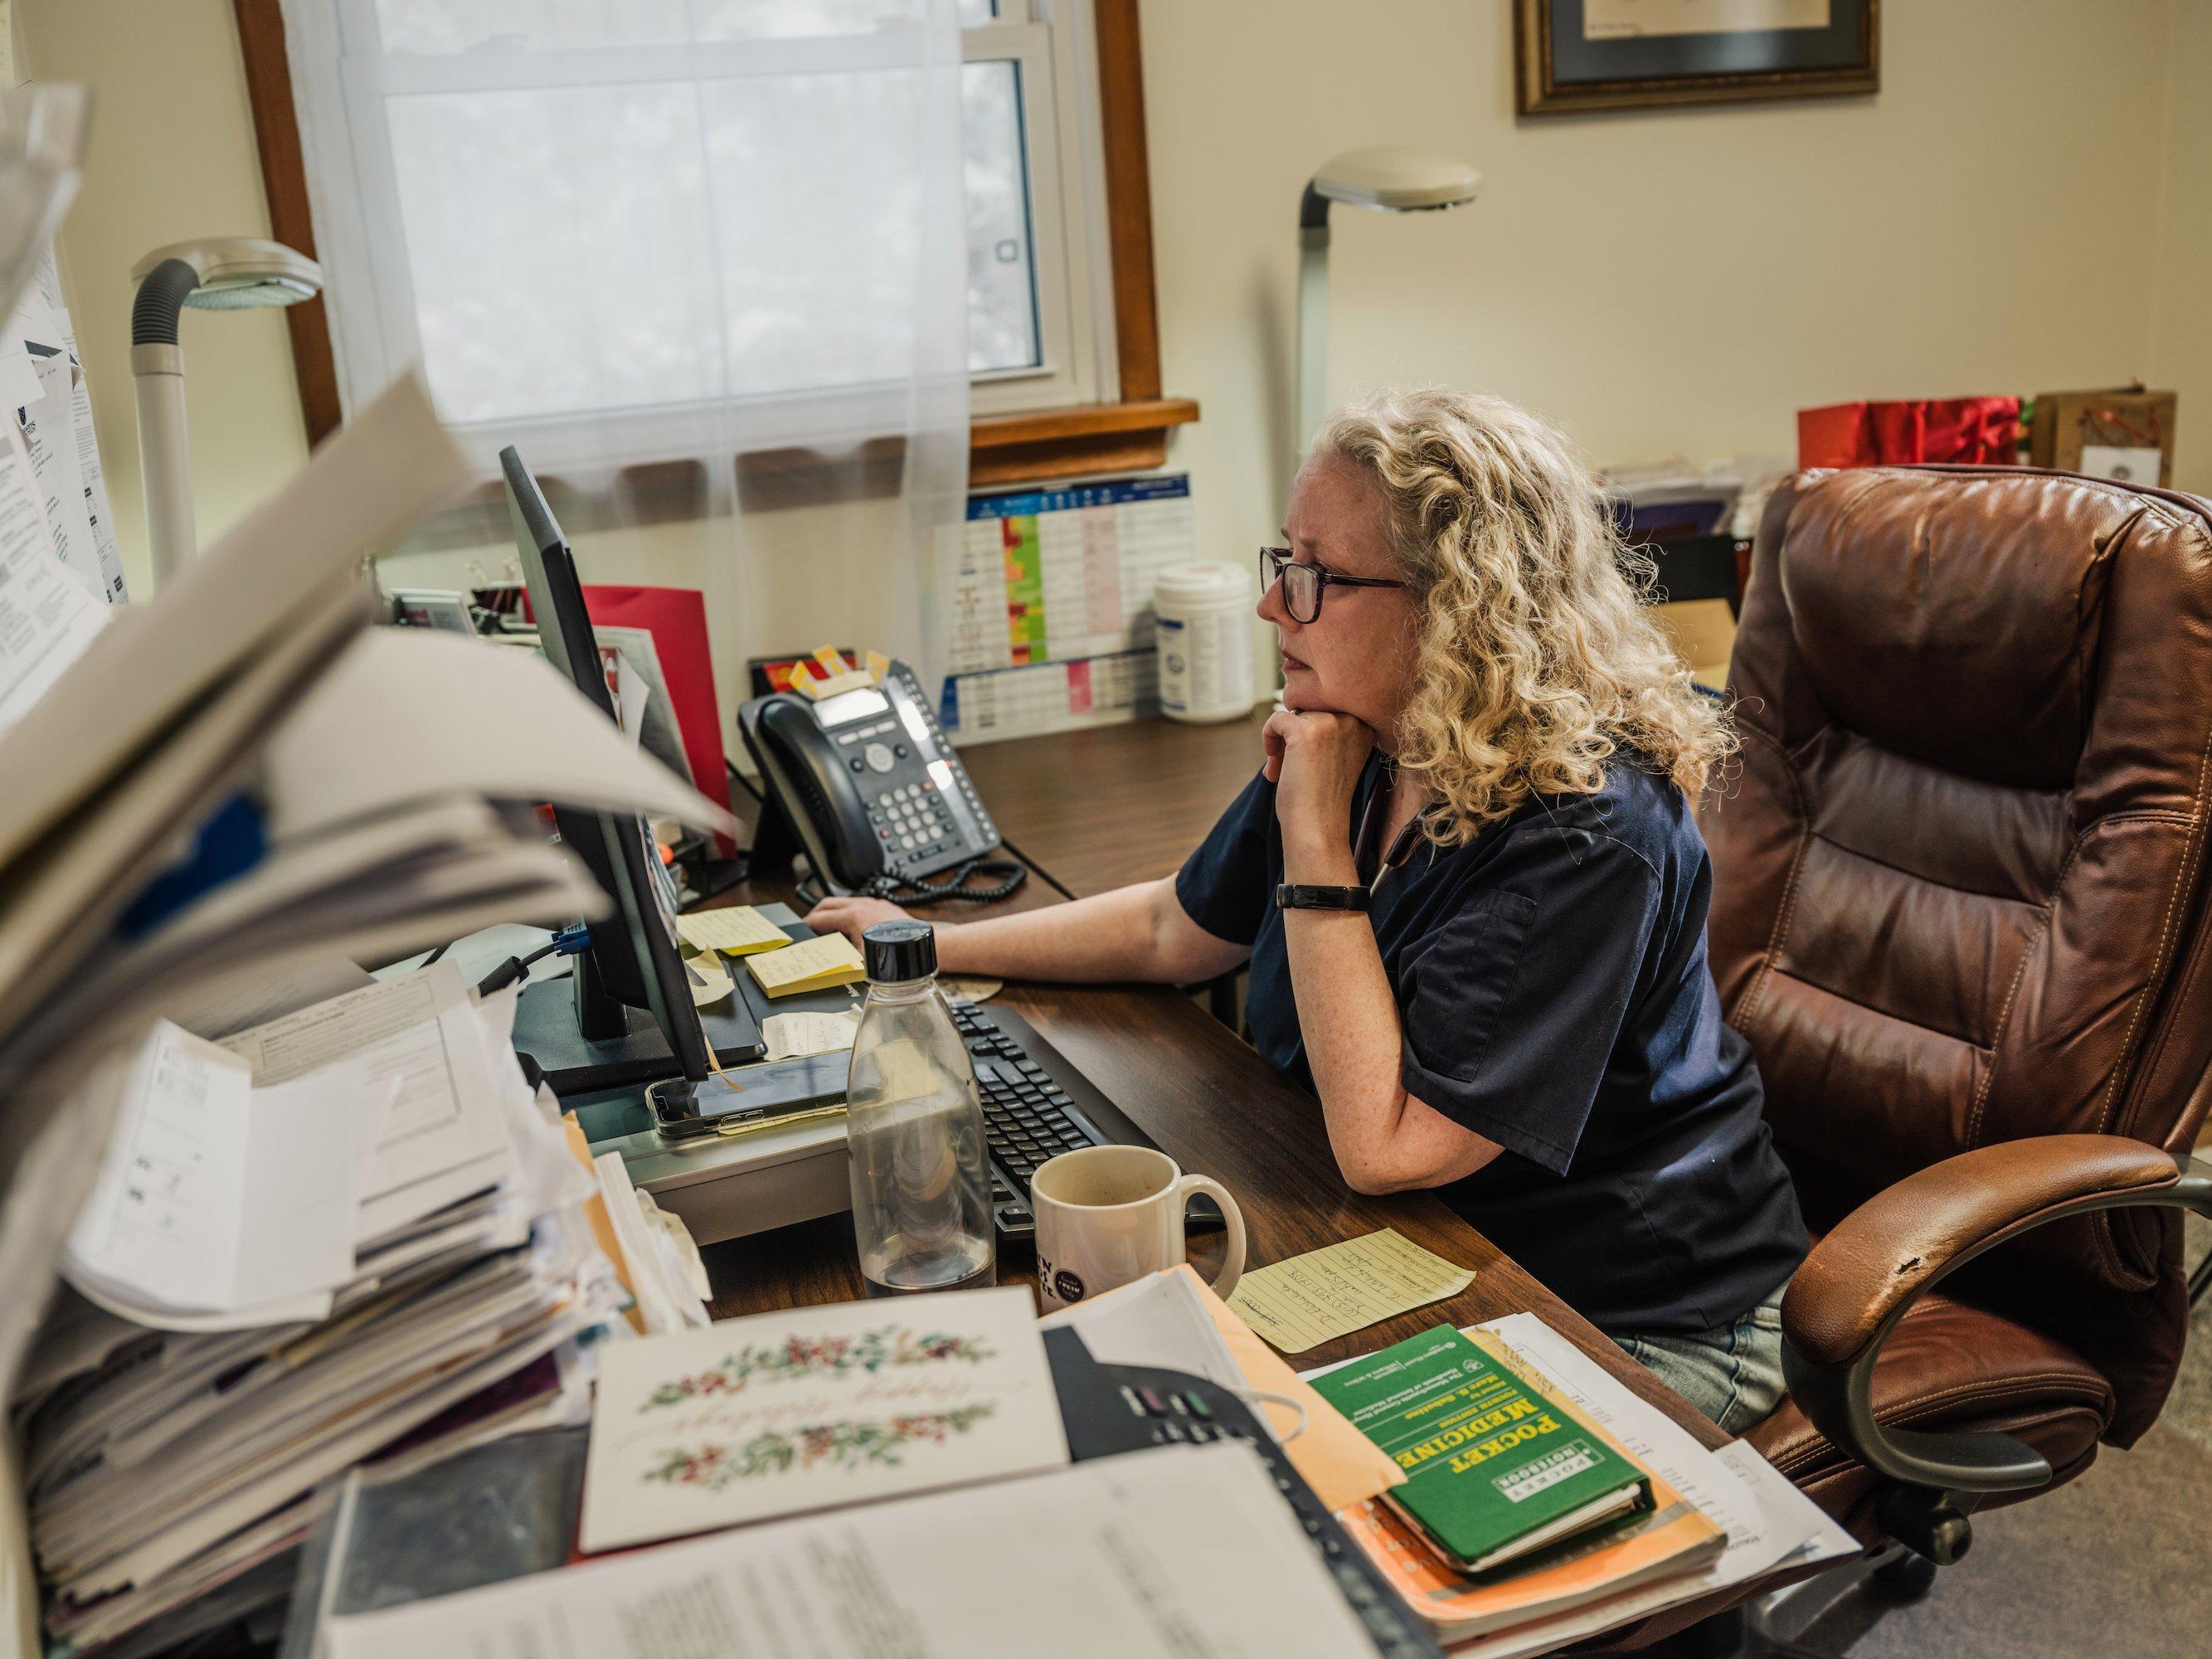 For seven years, Sabra Gibbens has been the only family physician available to her rural community